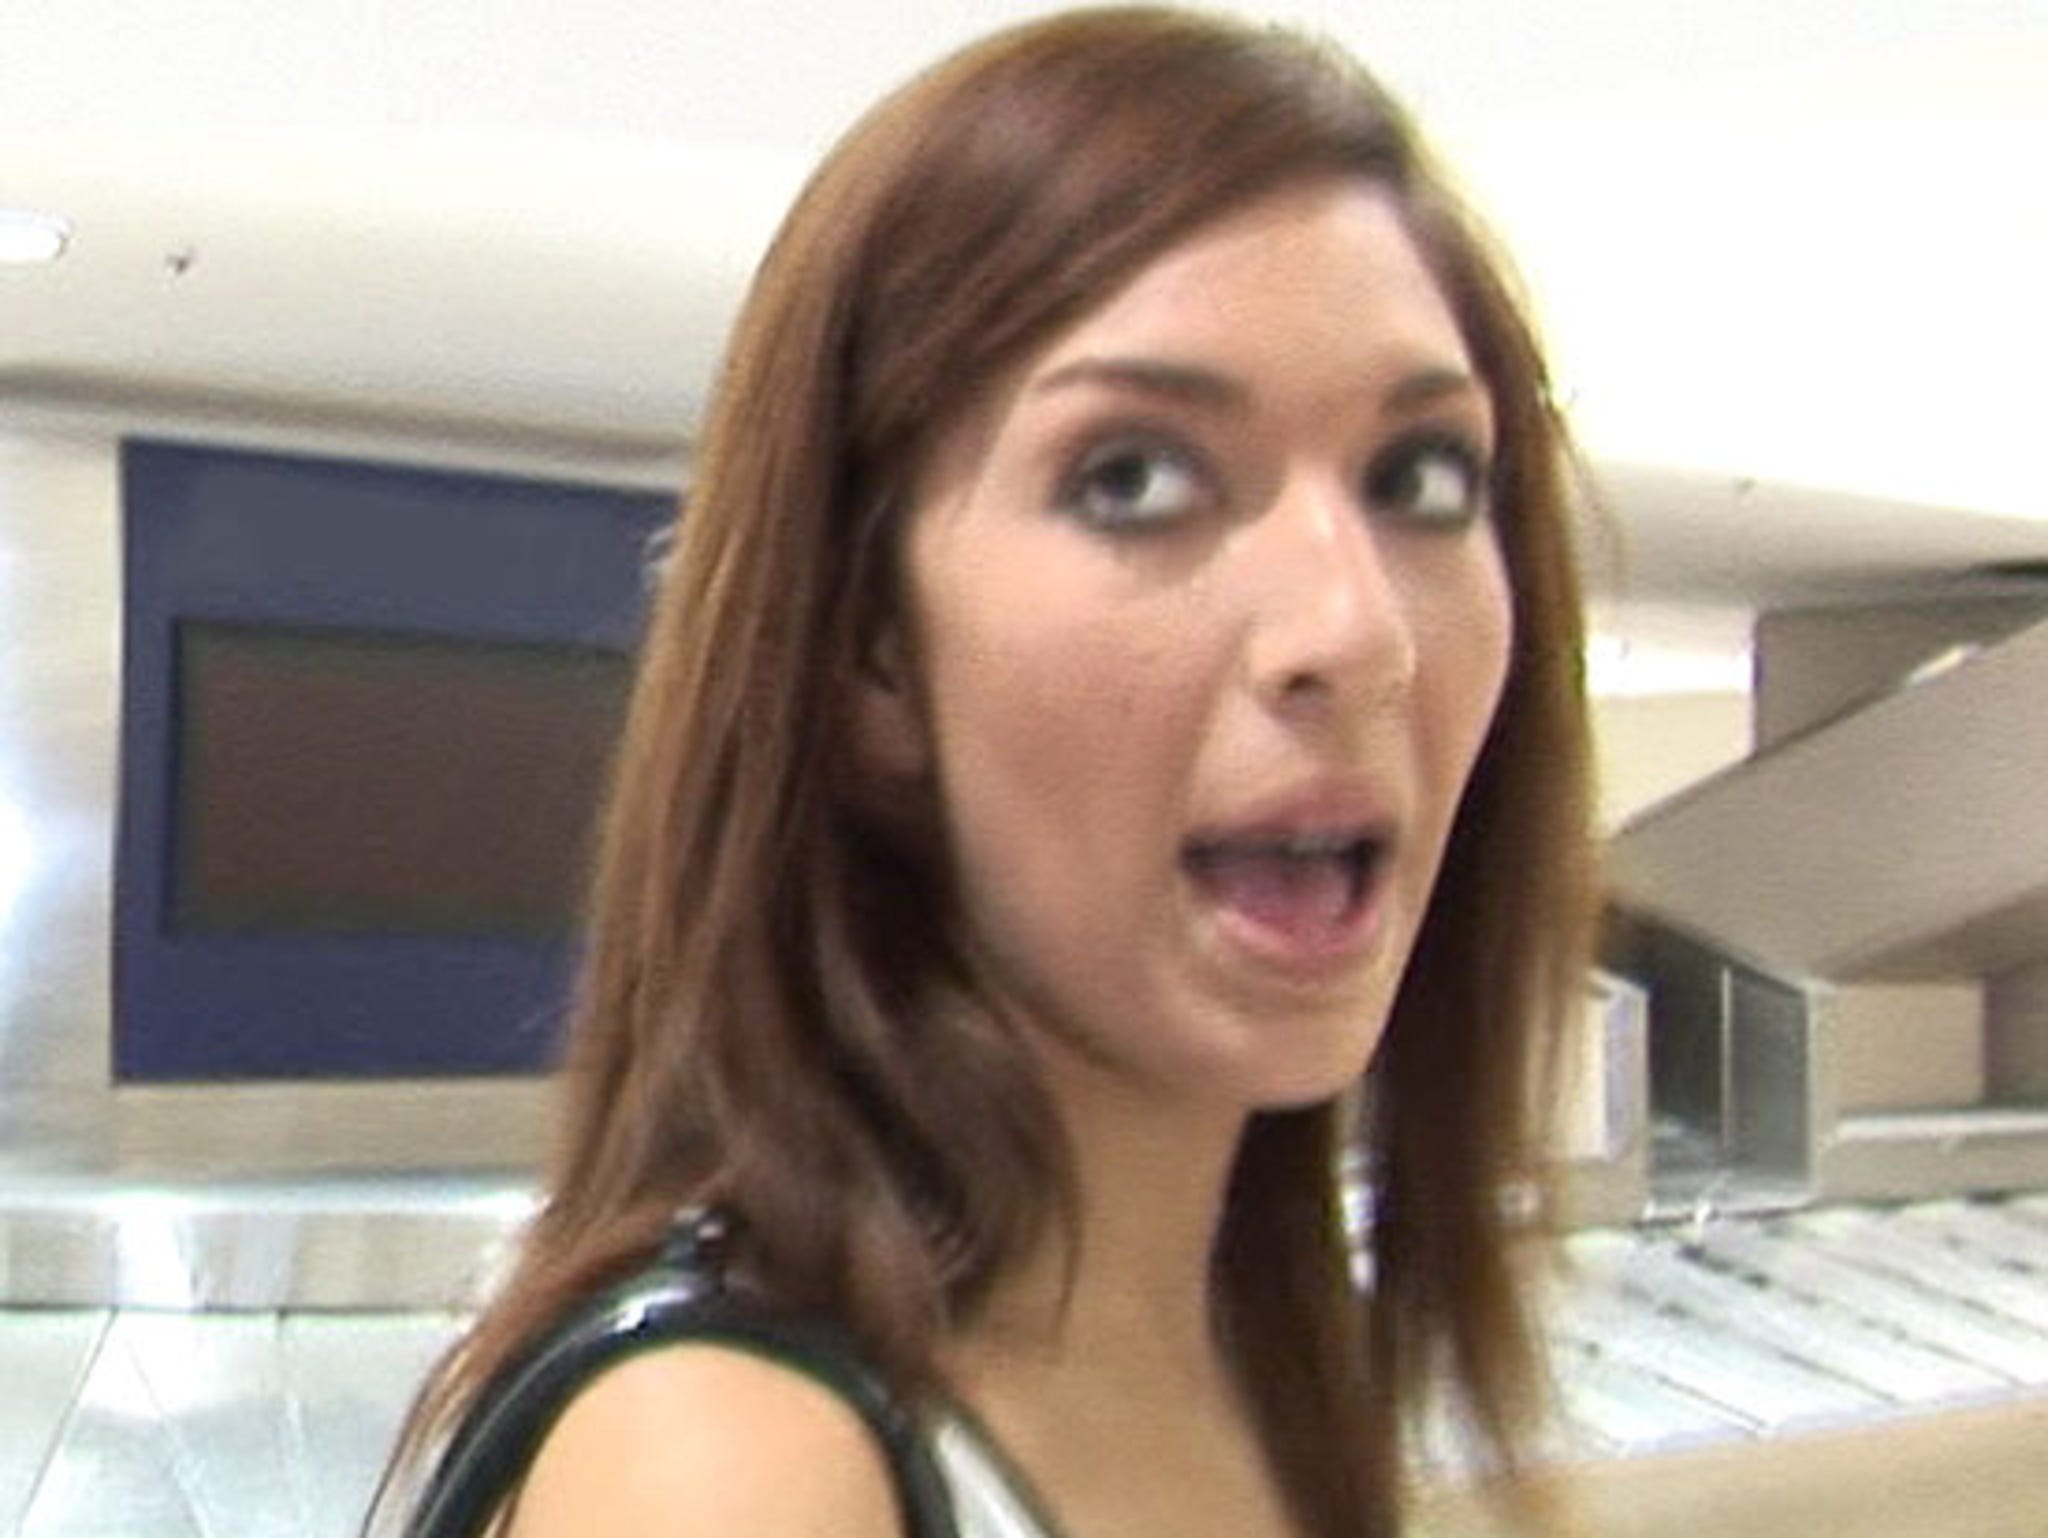 Farrah Abraham -- Yes, I Made a Porno ... But I Want Millions to Release It